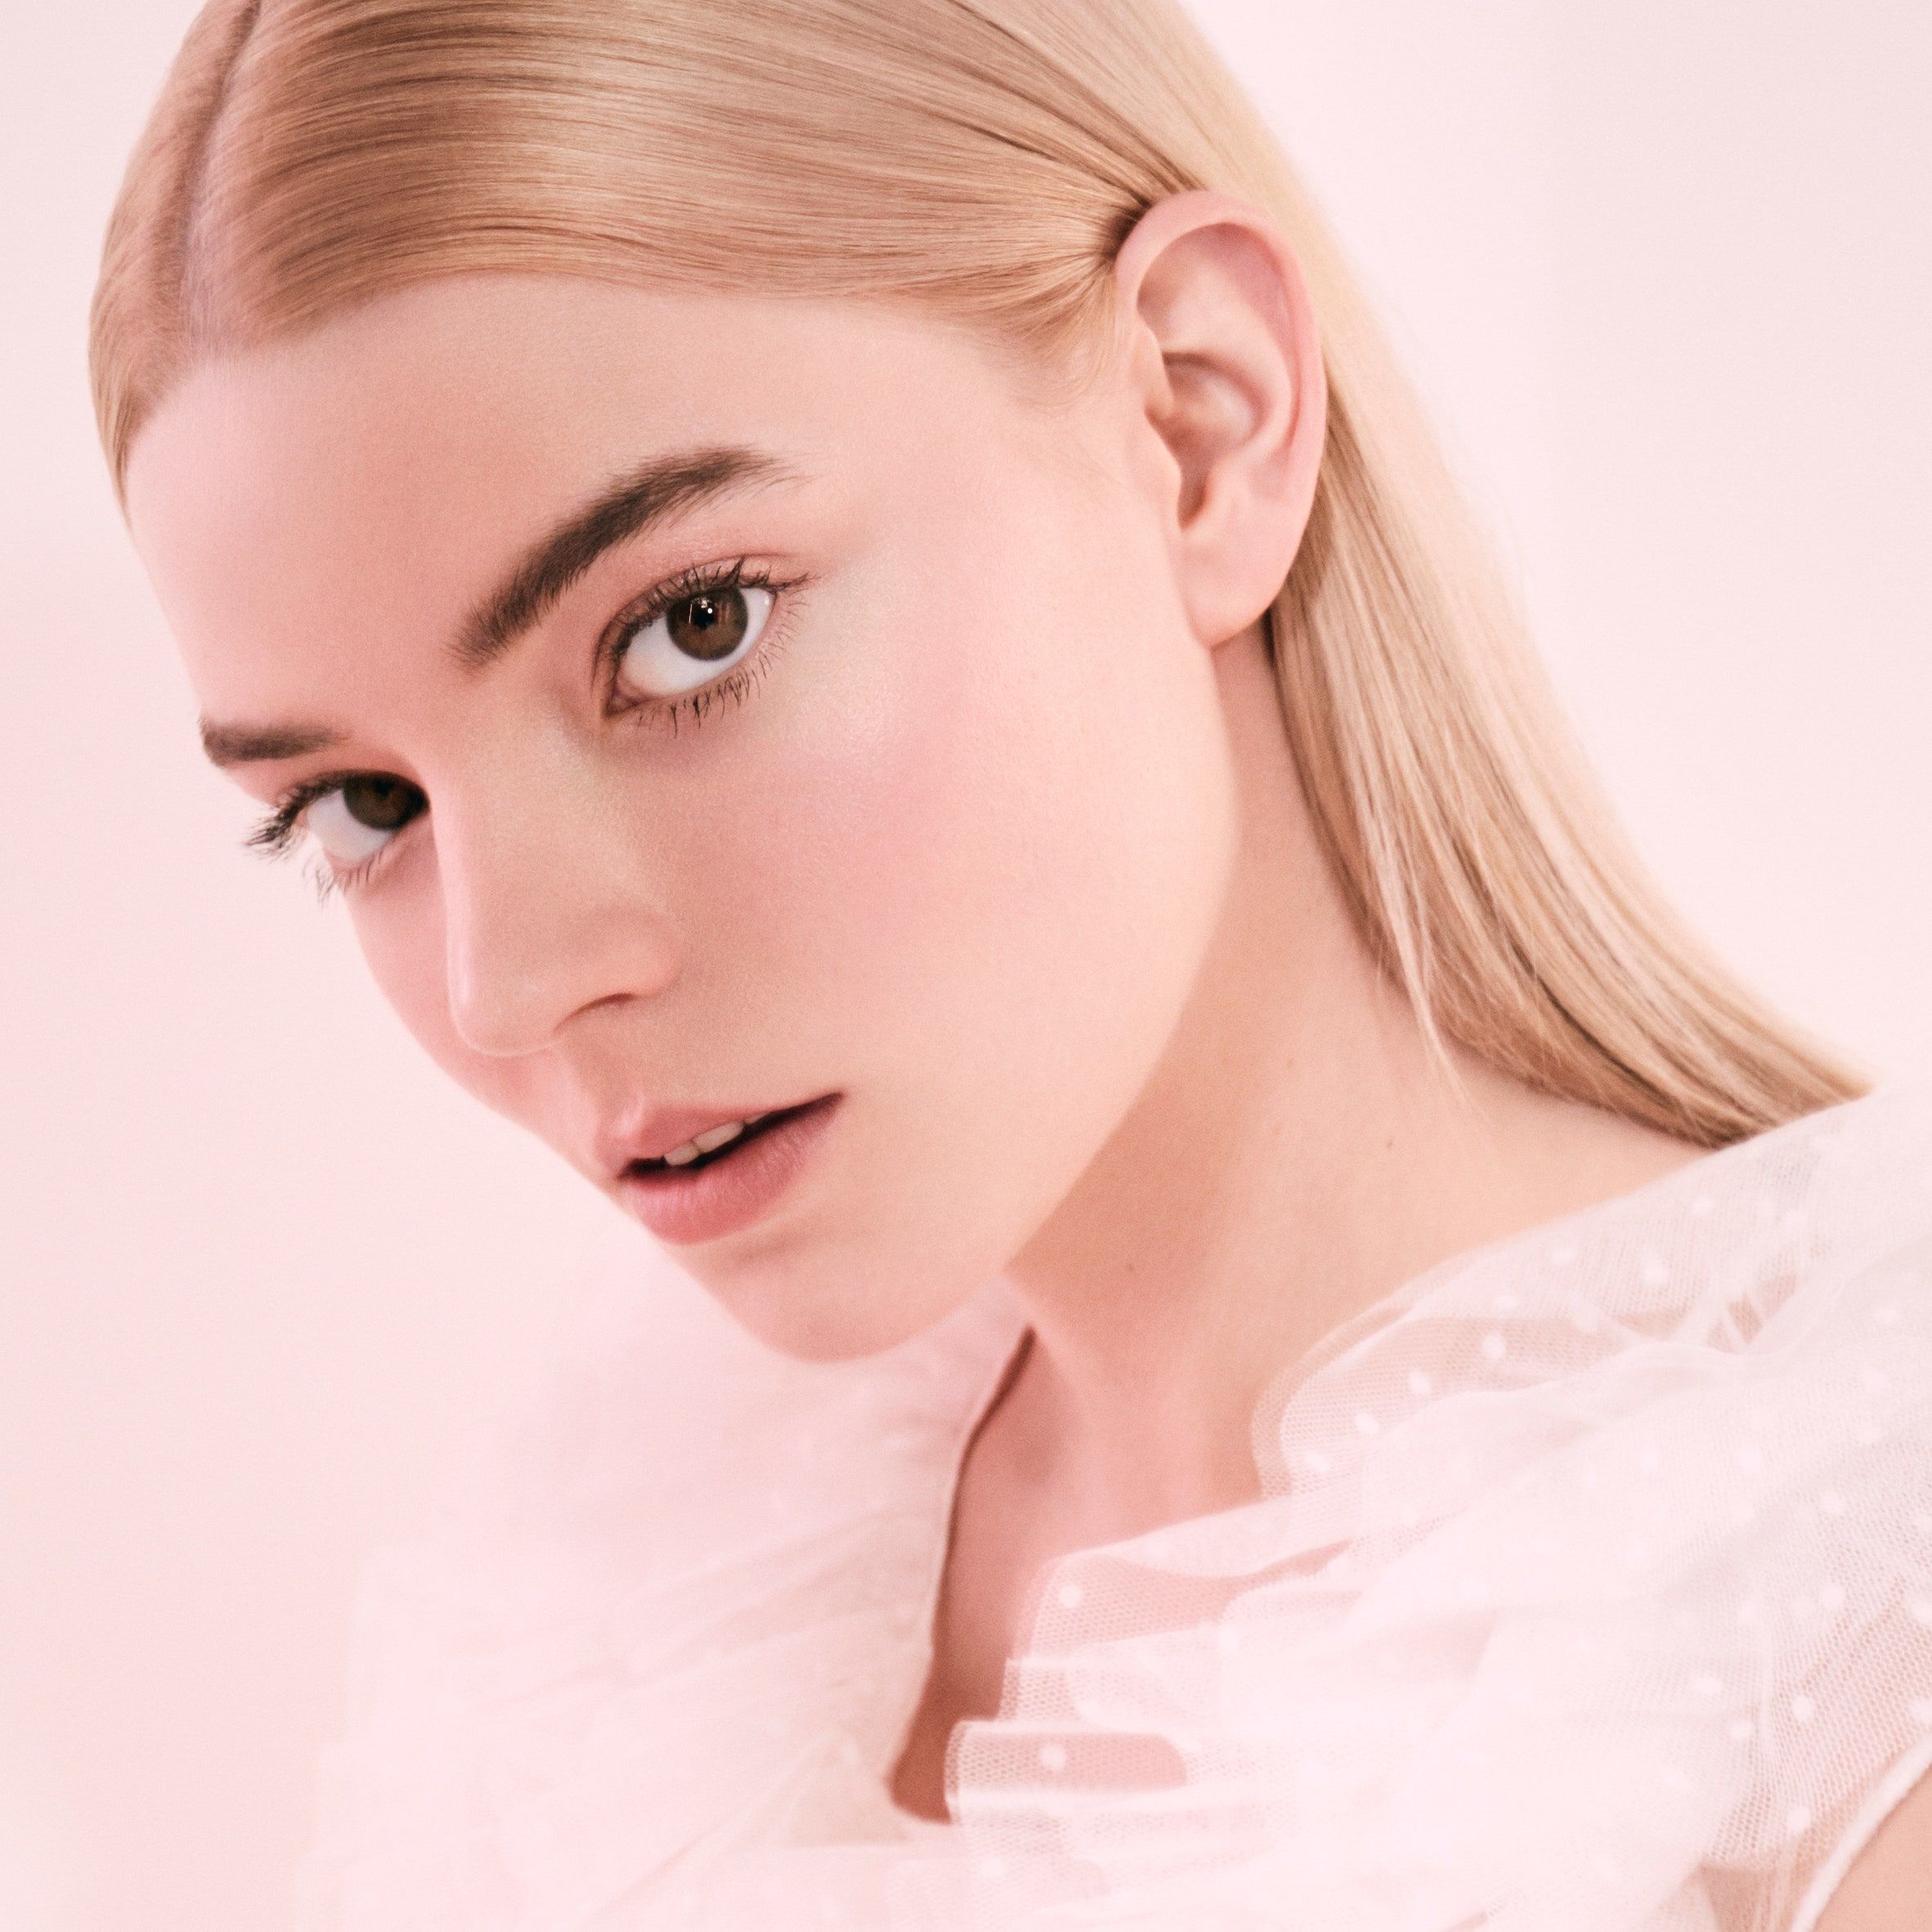 Anya Taylor Joy On Bath Time, Feline Flicks And Her \'Interview With The Vampire\' Aesthetic